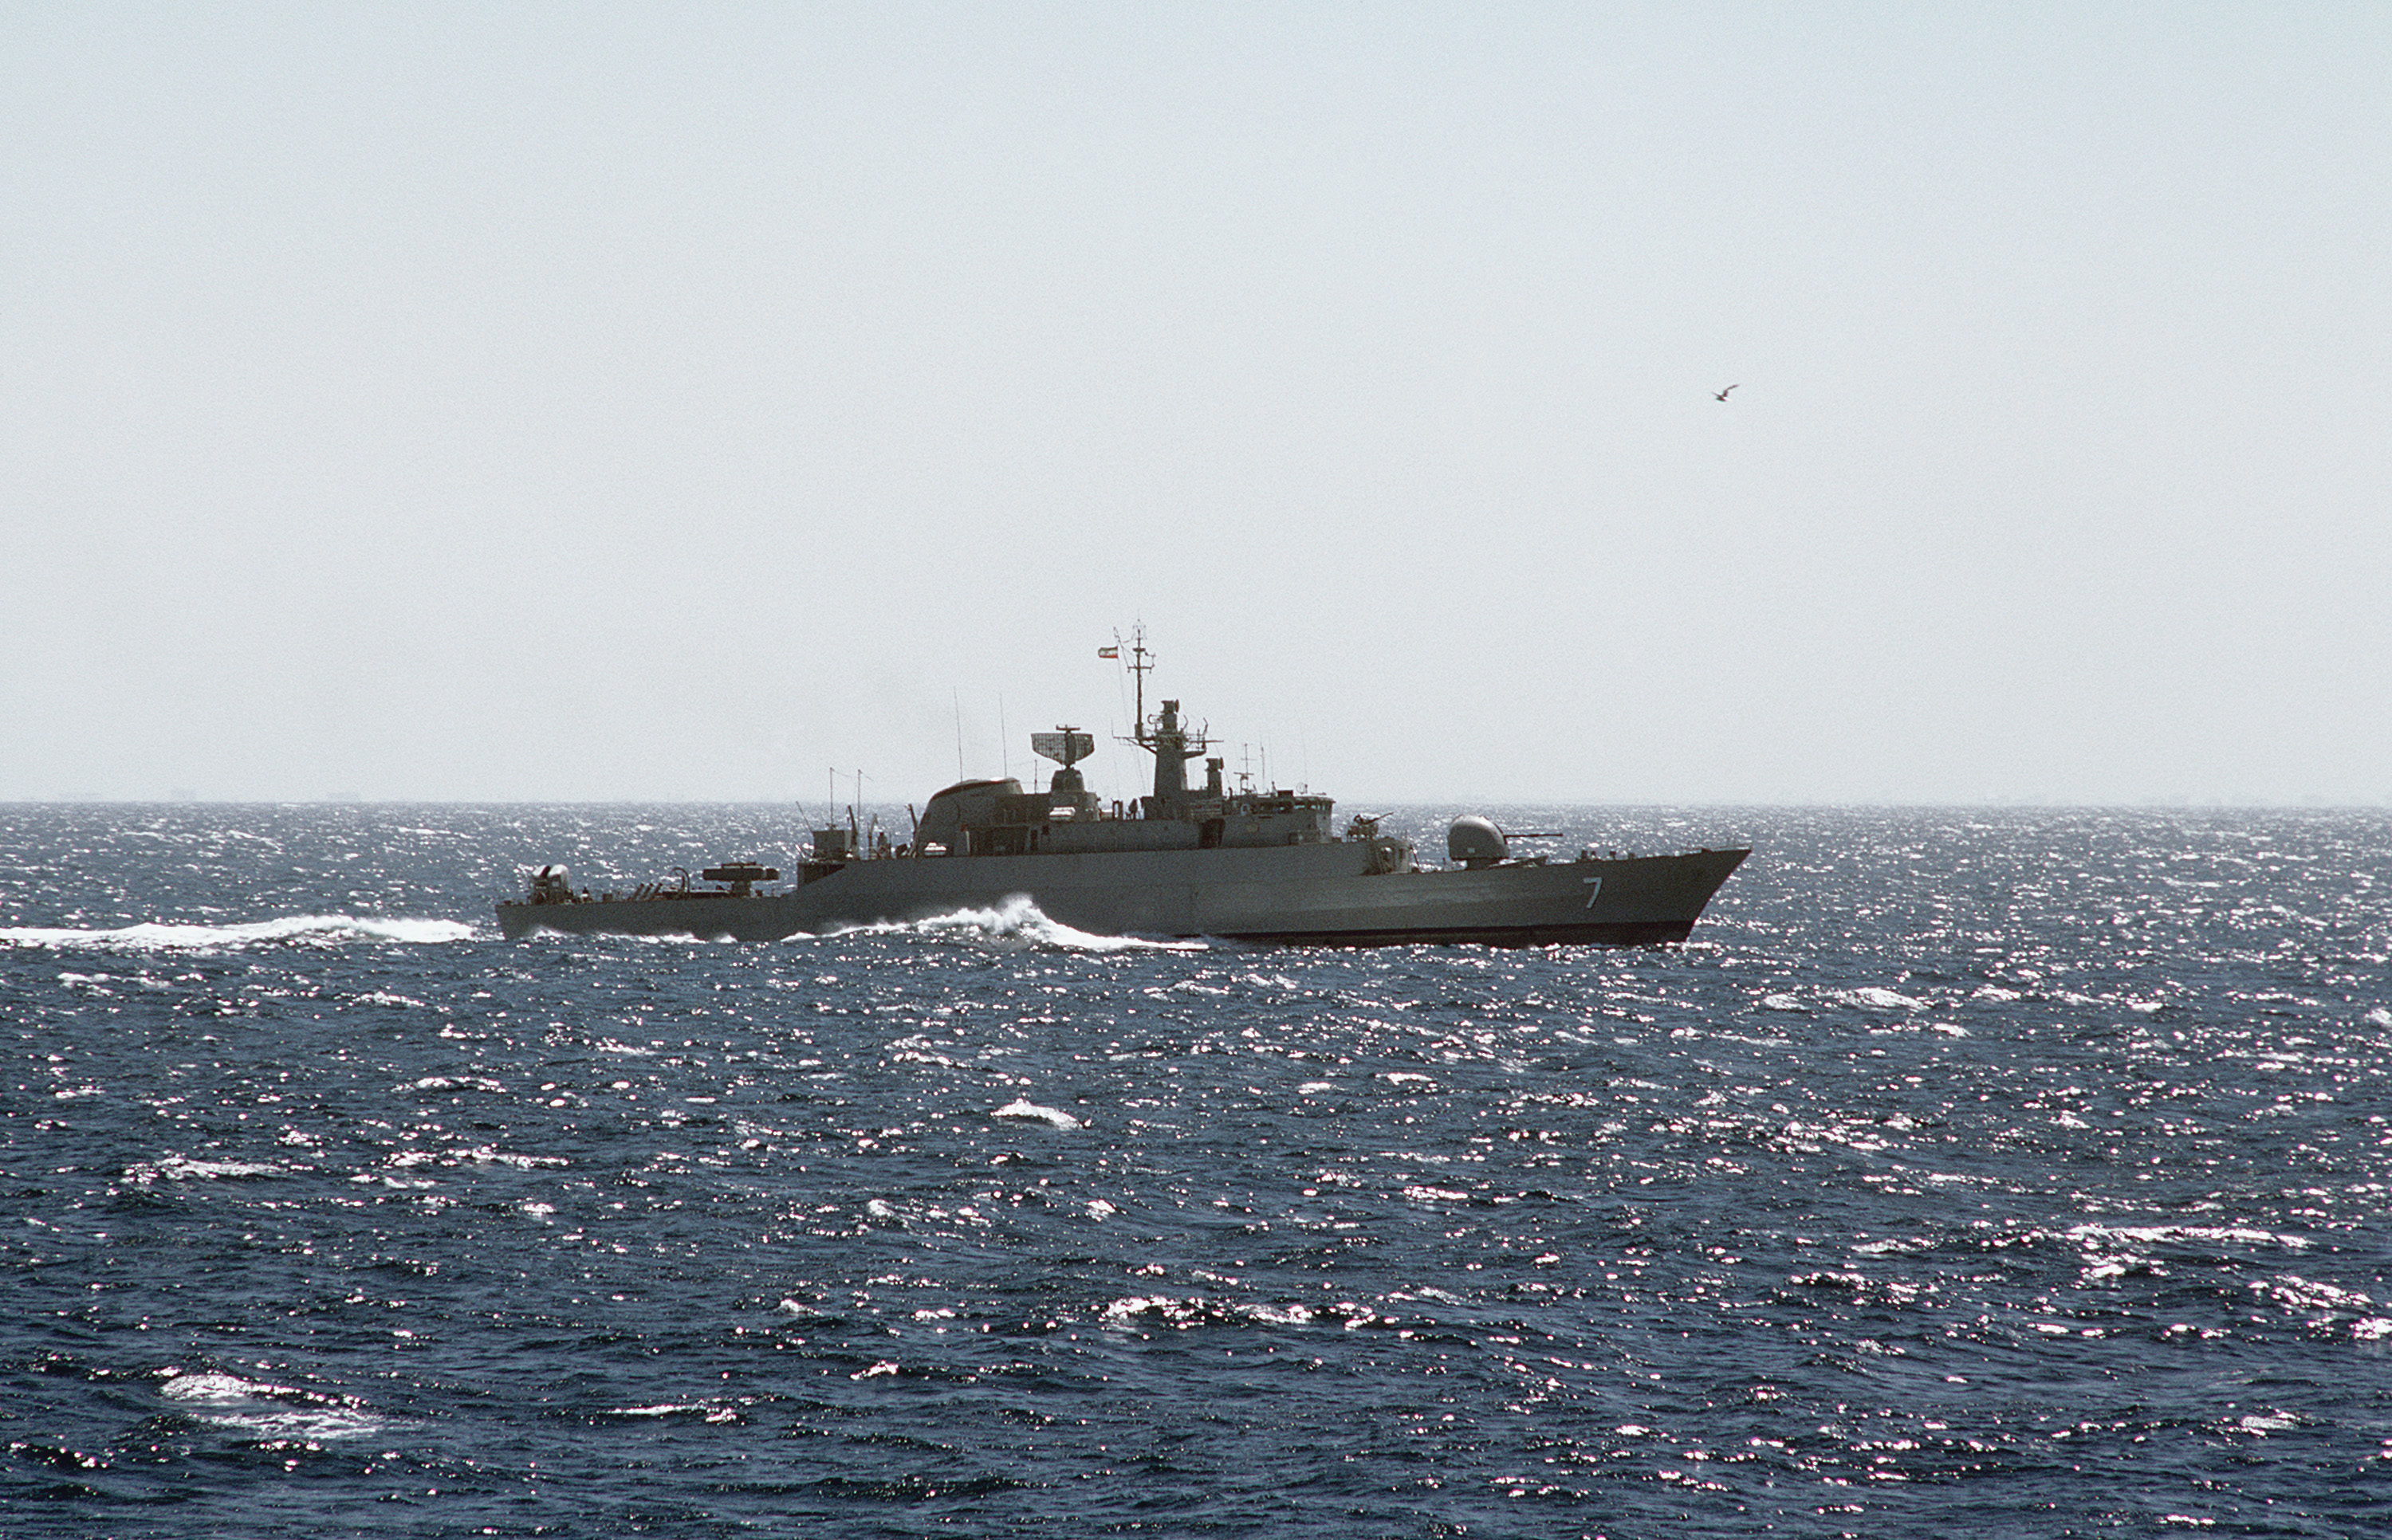 A starboard beam view of an Iranian Alvand class frigate underway. US Navy Photo